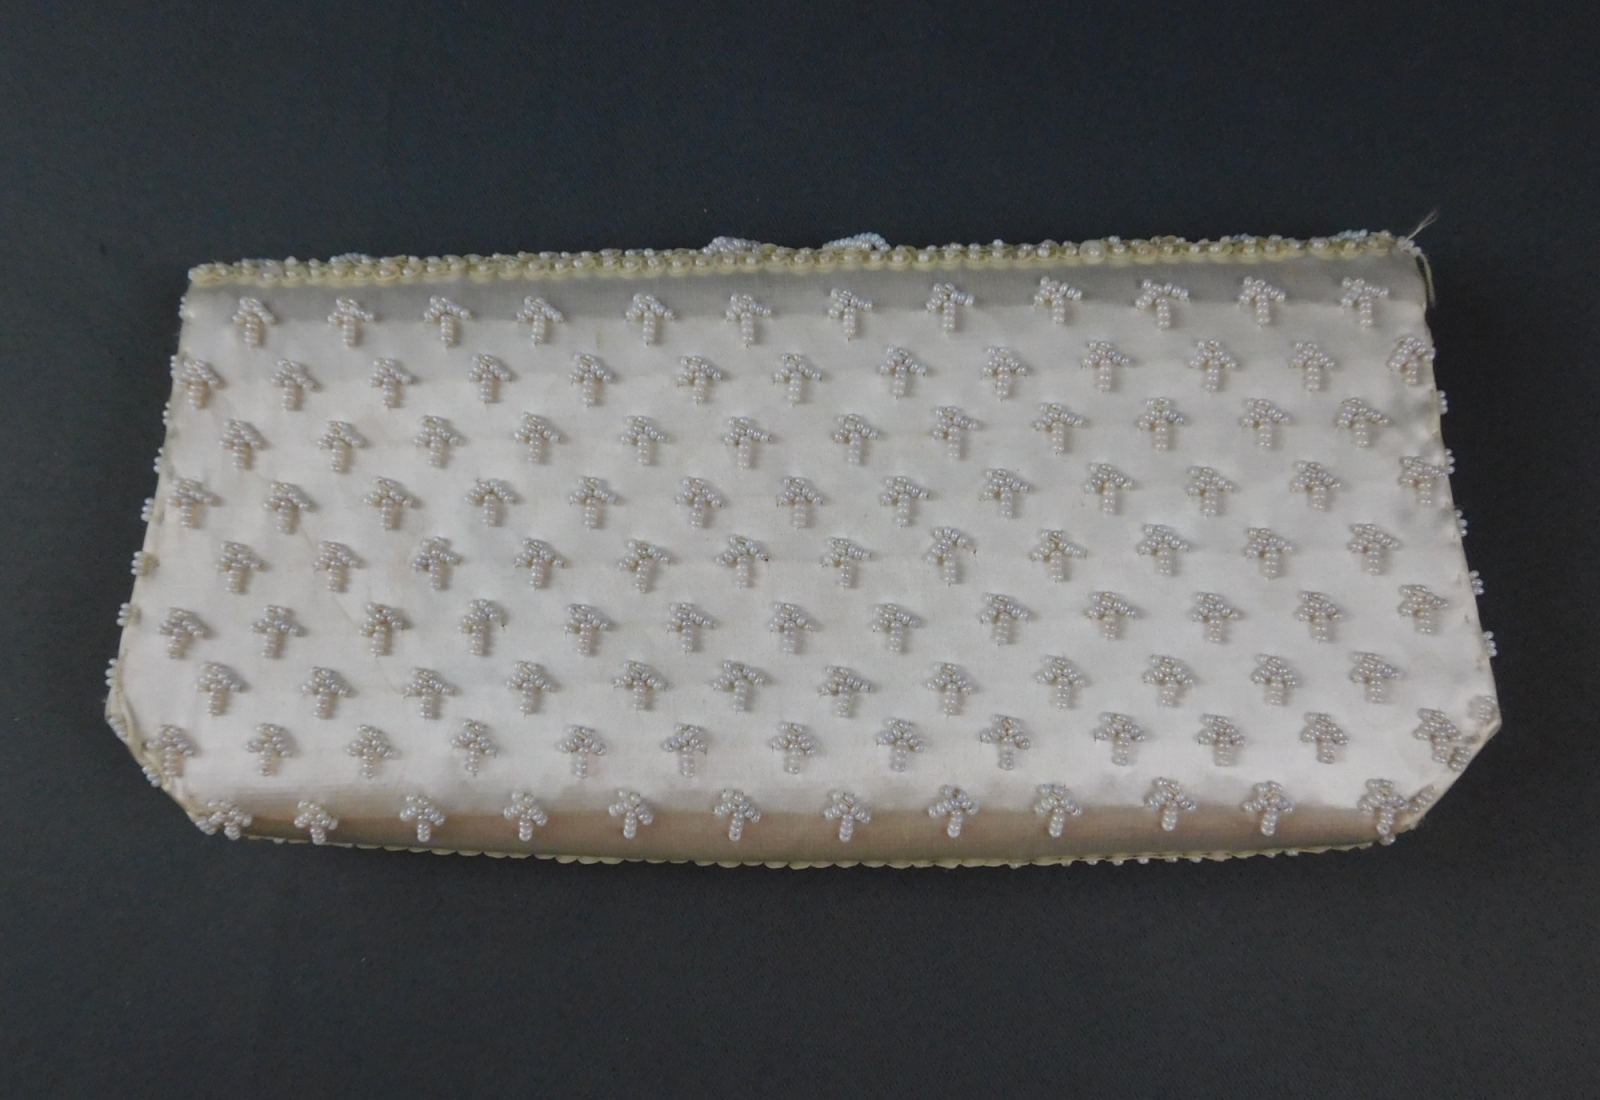 Vintage White Beaded & Ivory Satin Clutch Purse, 1960s Sequins